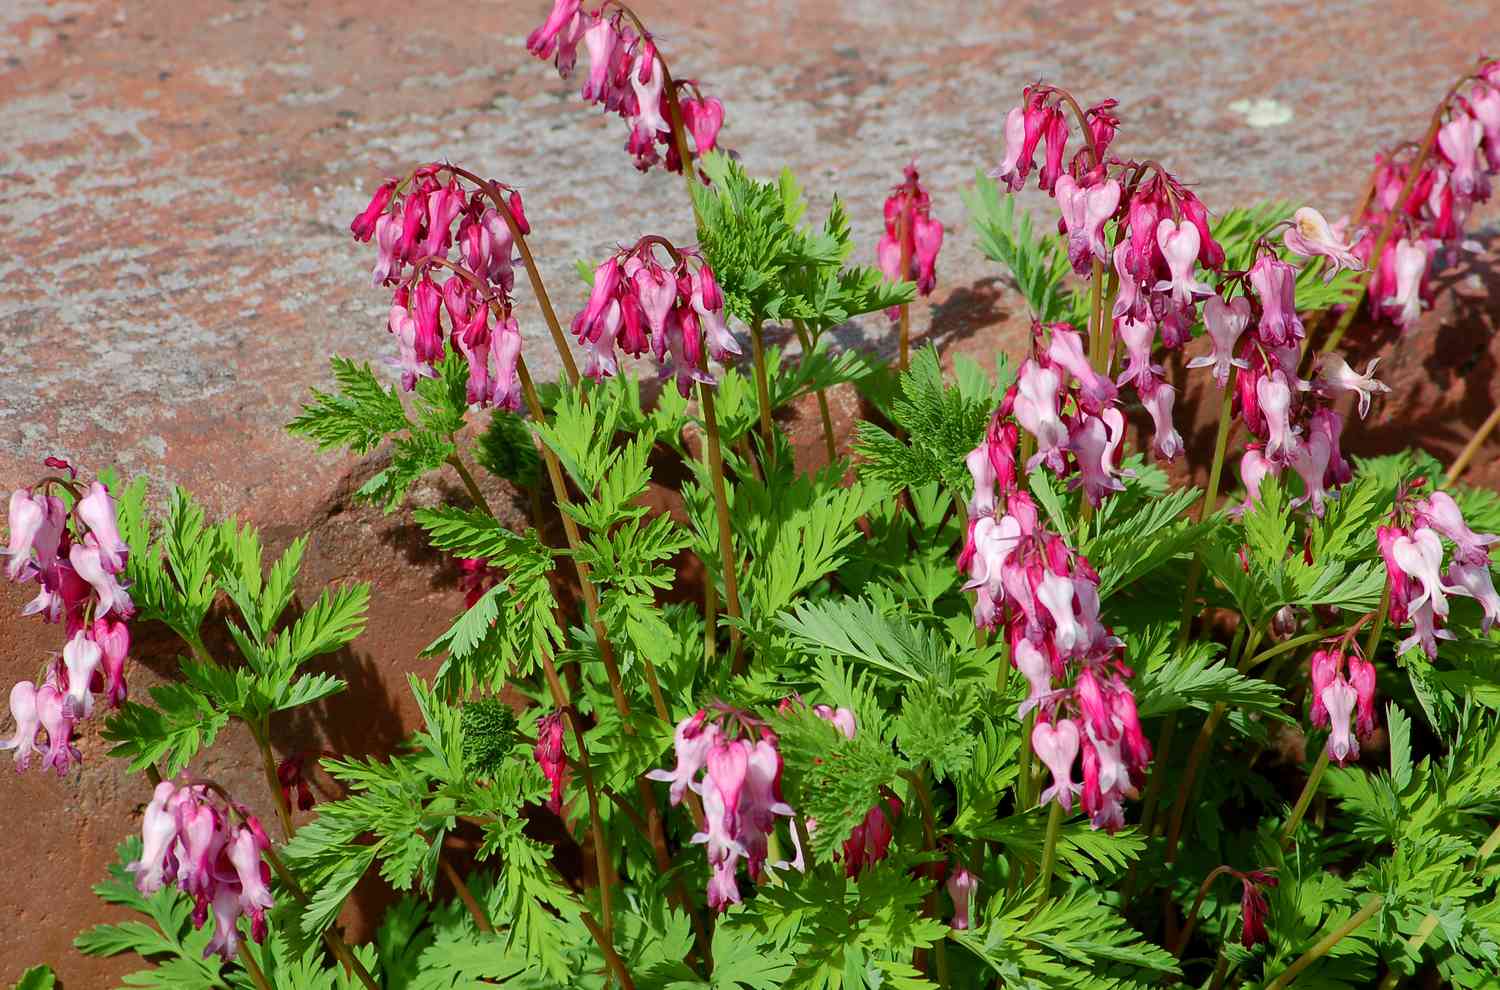 Fringed bleeding heart with pink flowers.